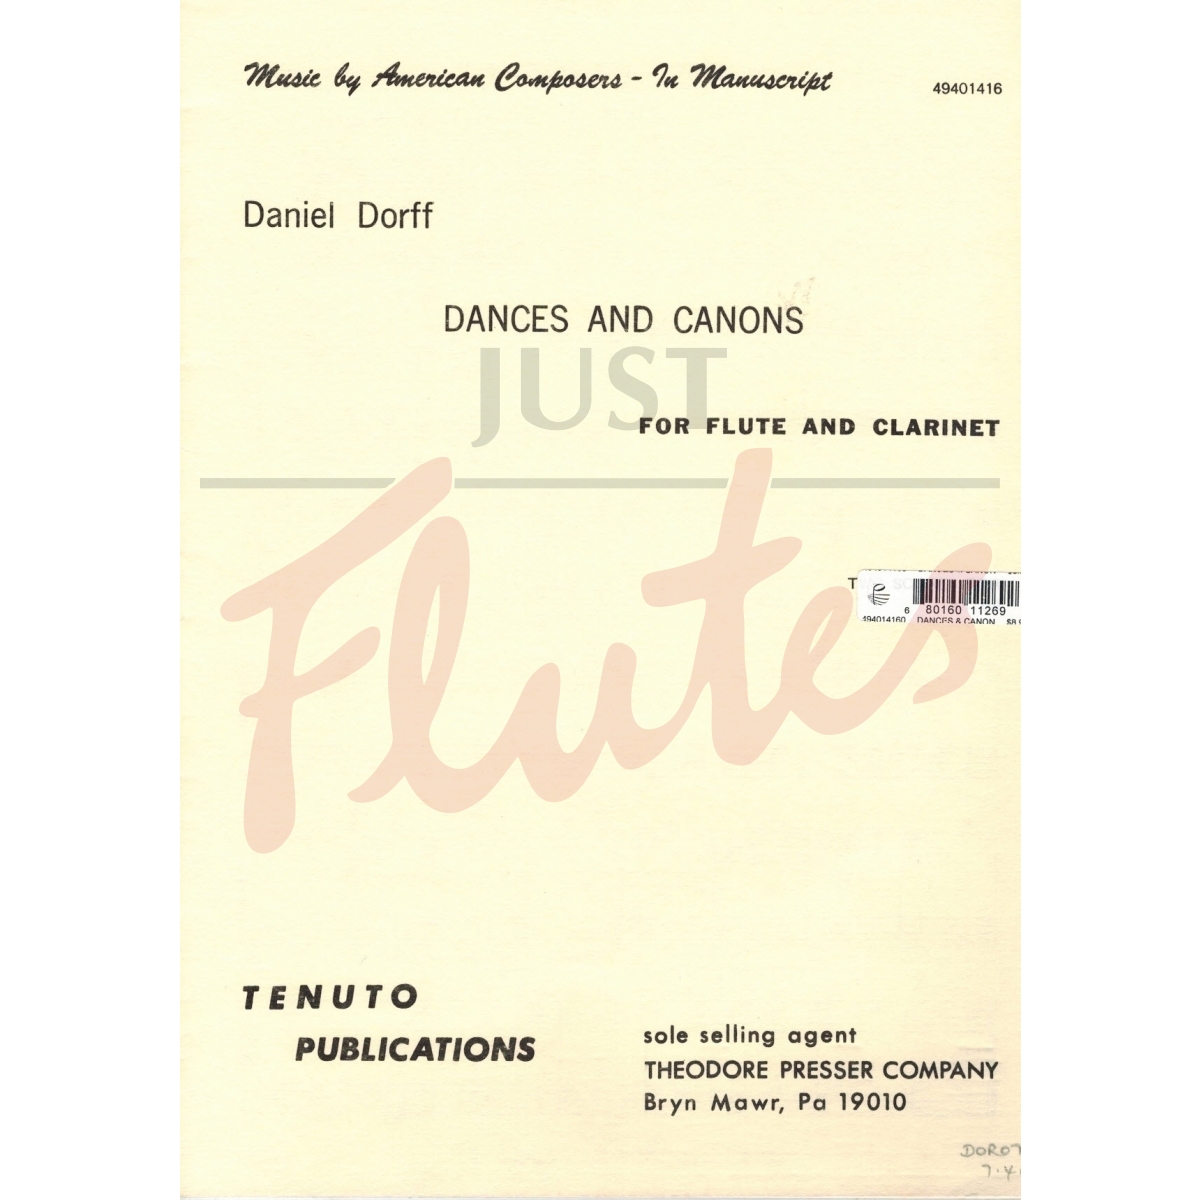 Dances and Canons for Flute and Clarinet